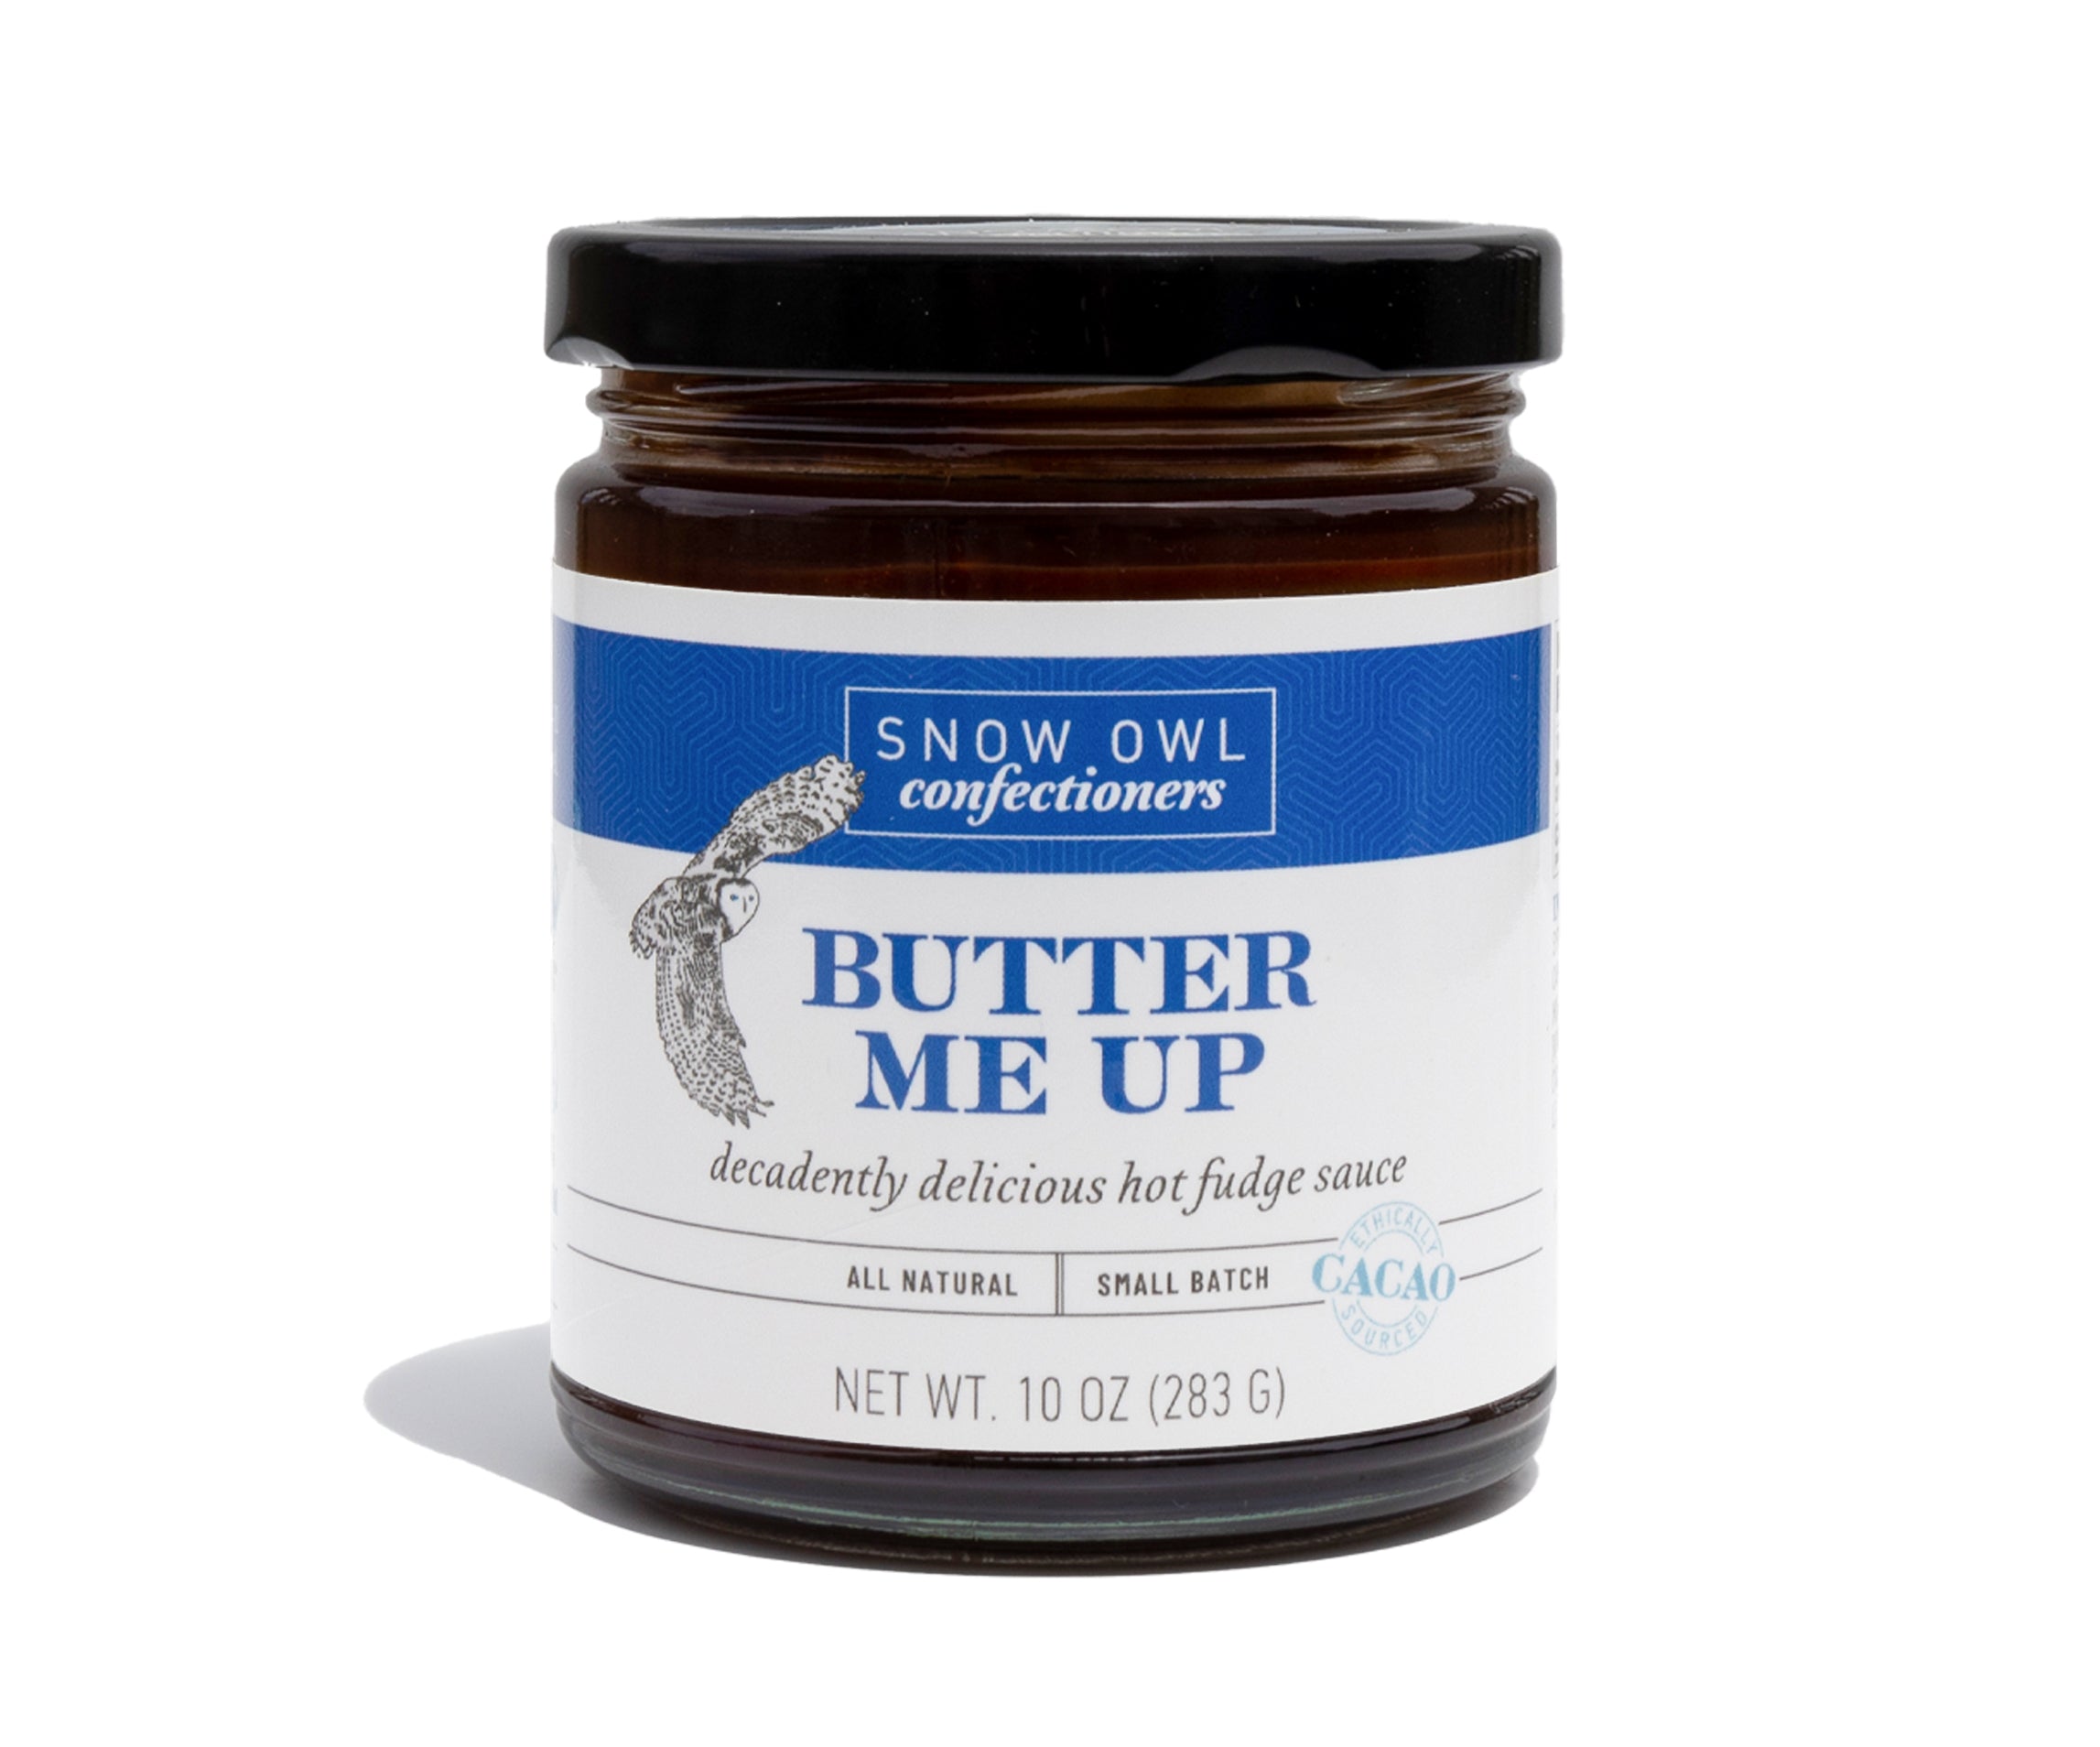 Fill Me Up Buttercup – Snow Owl Confectioners